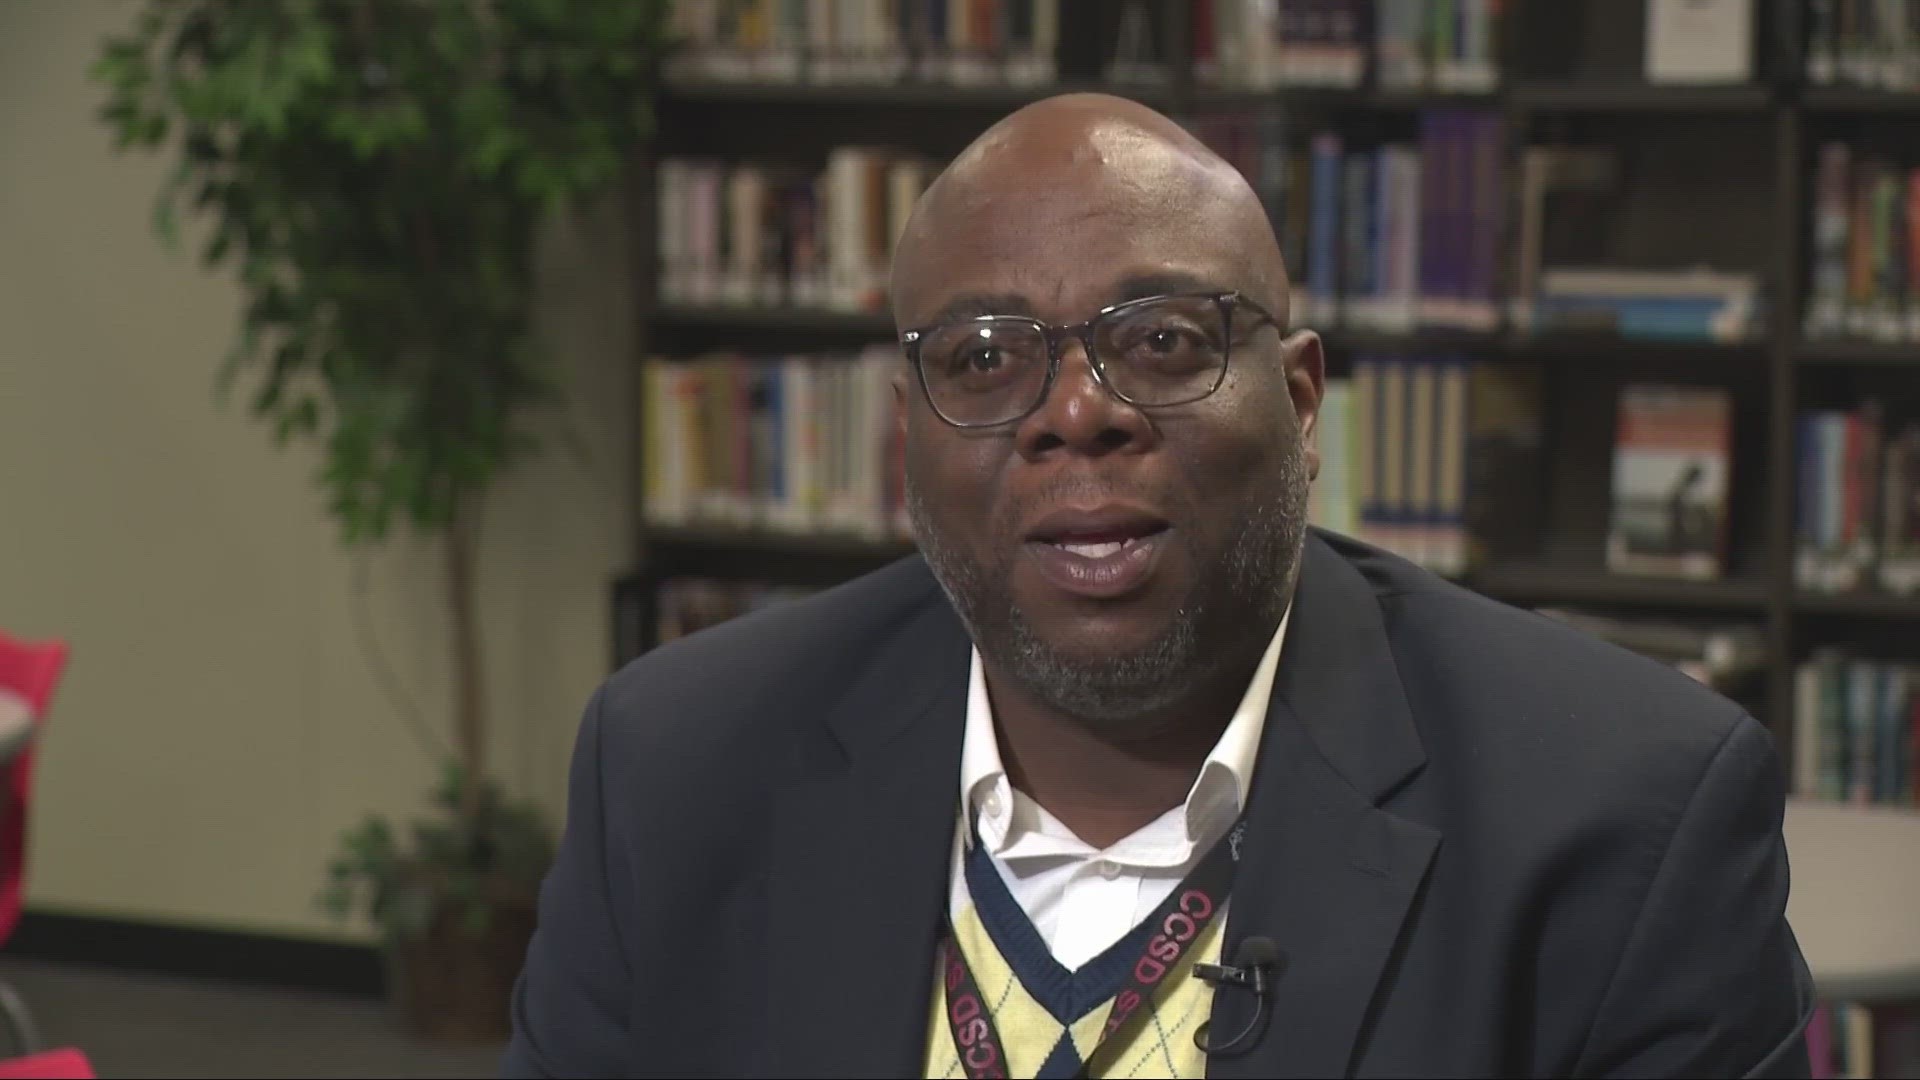 An administrator and 'graduation coach' at Canton McKinley High School shares his story with students to keep them on track to graduate.